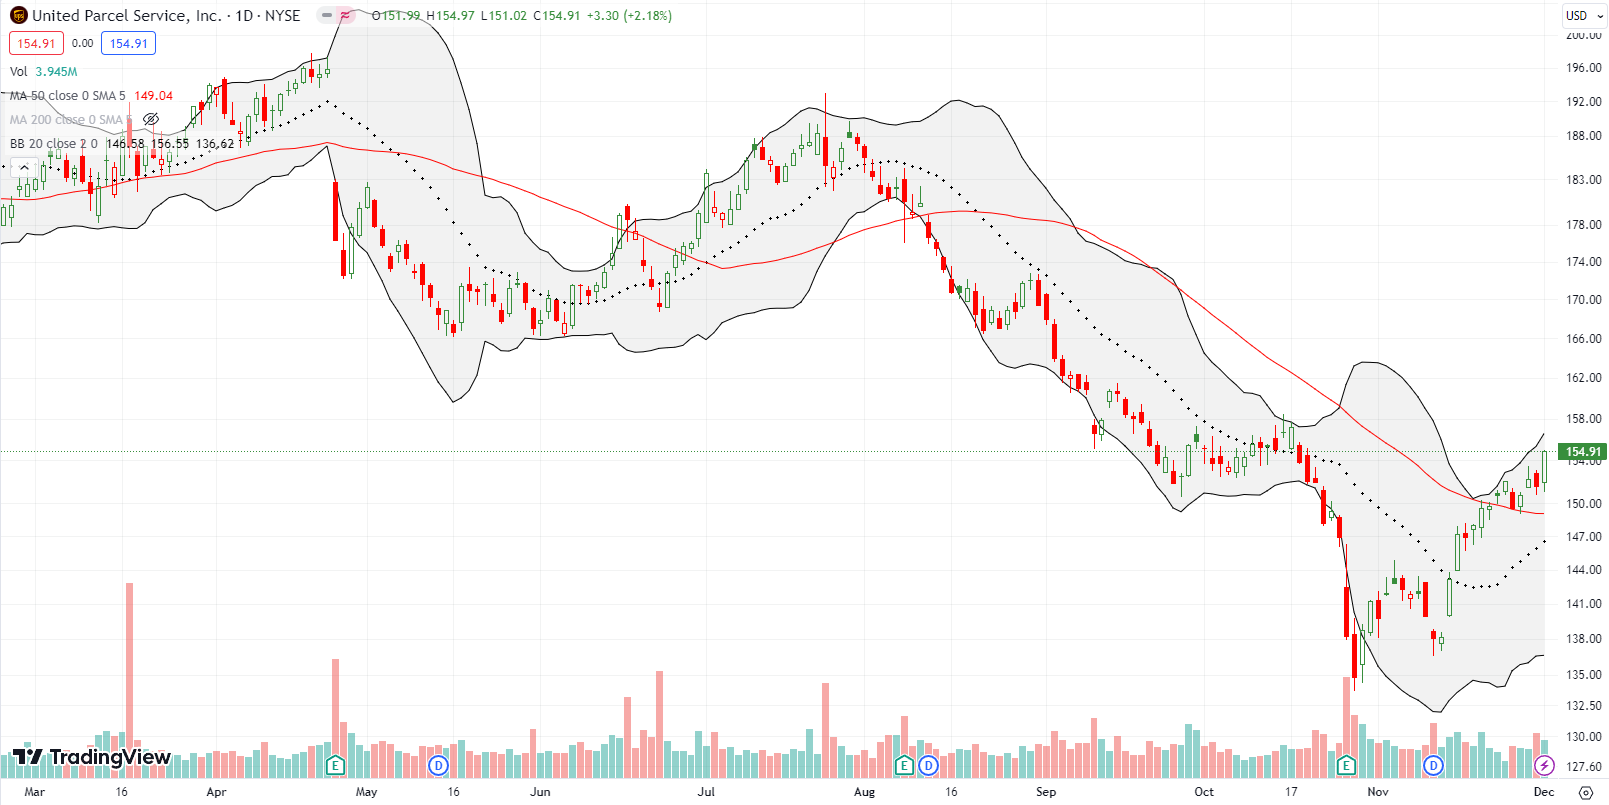 United Parcel Service, Inc (UPS) confirmed a 50DMA breakout, and continued its upward climb that started with the late October post-earnings results.